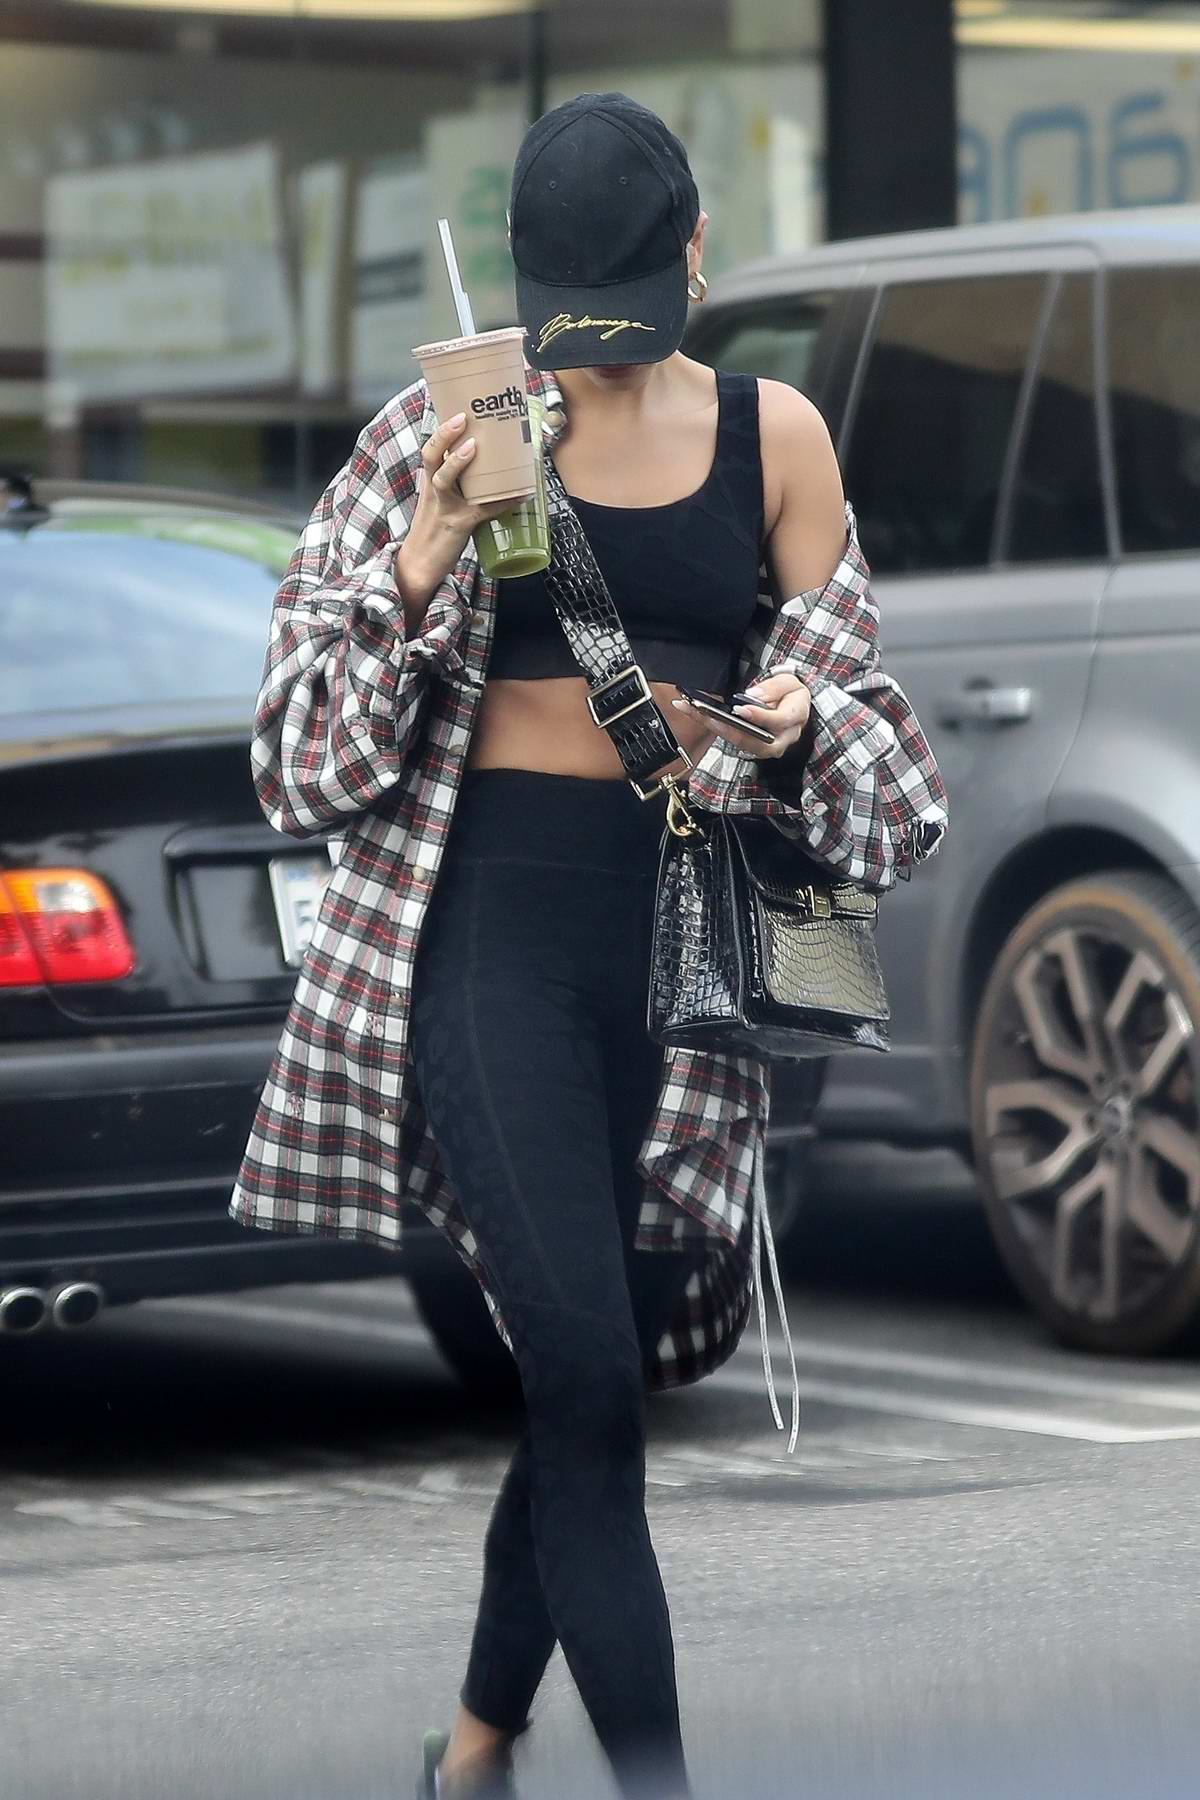 hailey bieber shows off her toned physique in a black sports bra and ...